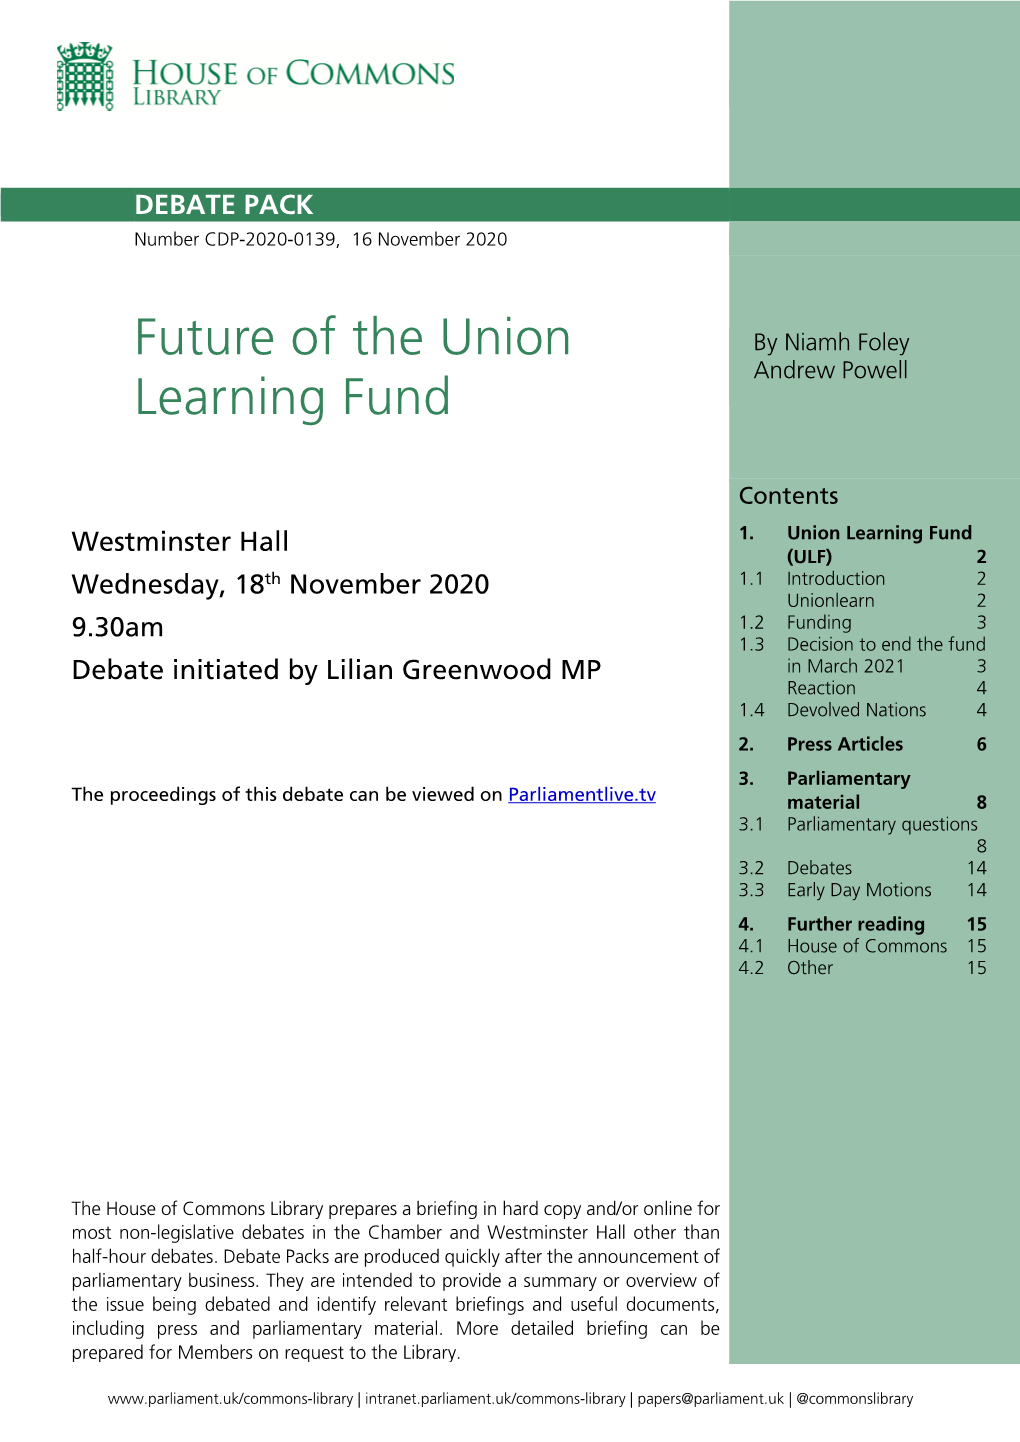 Future of the Union Learning Fund (ULF)